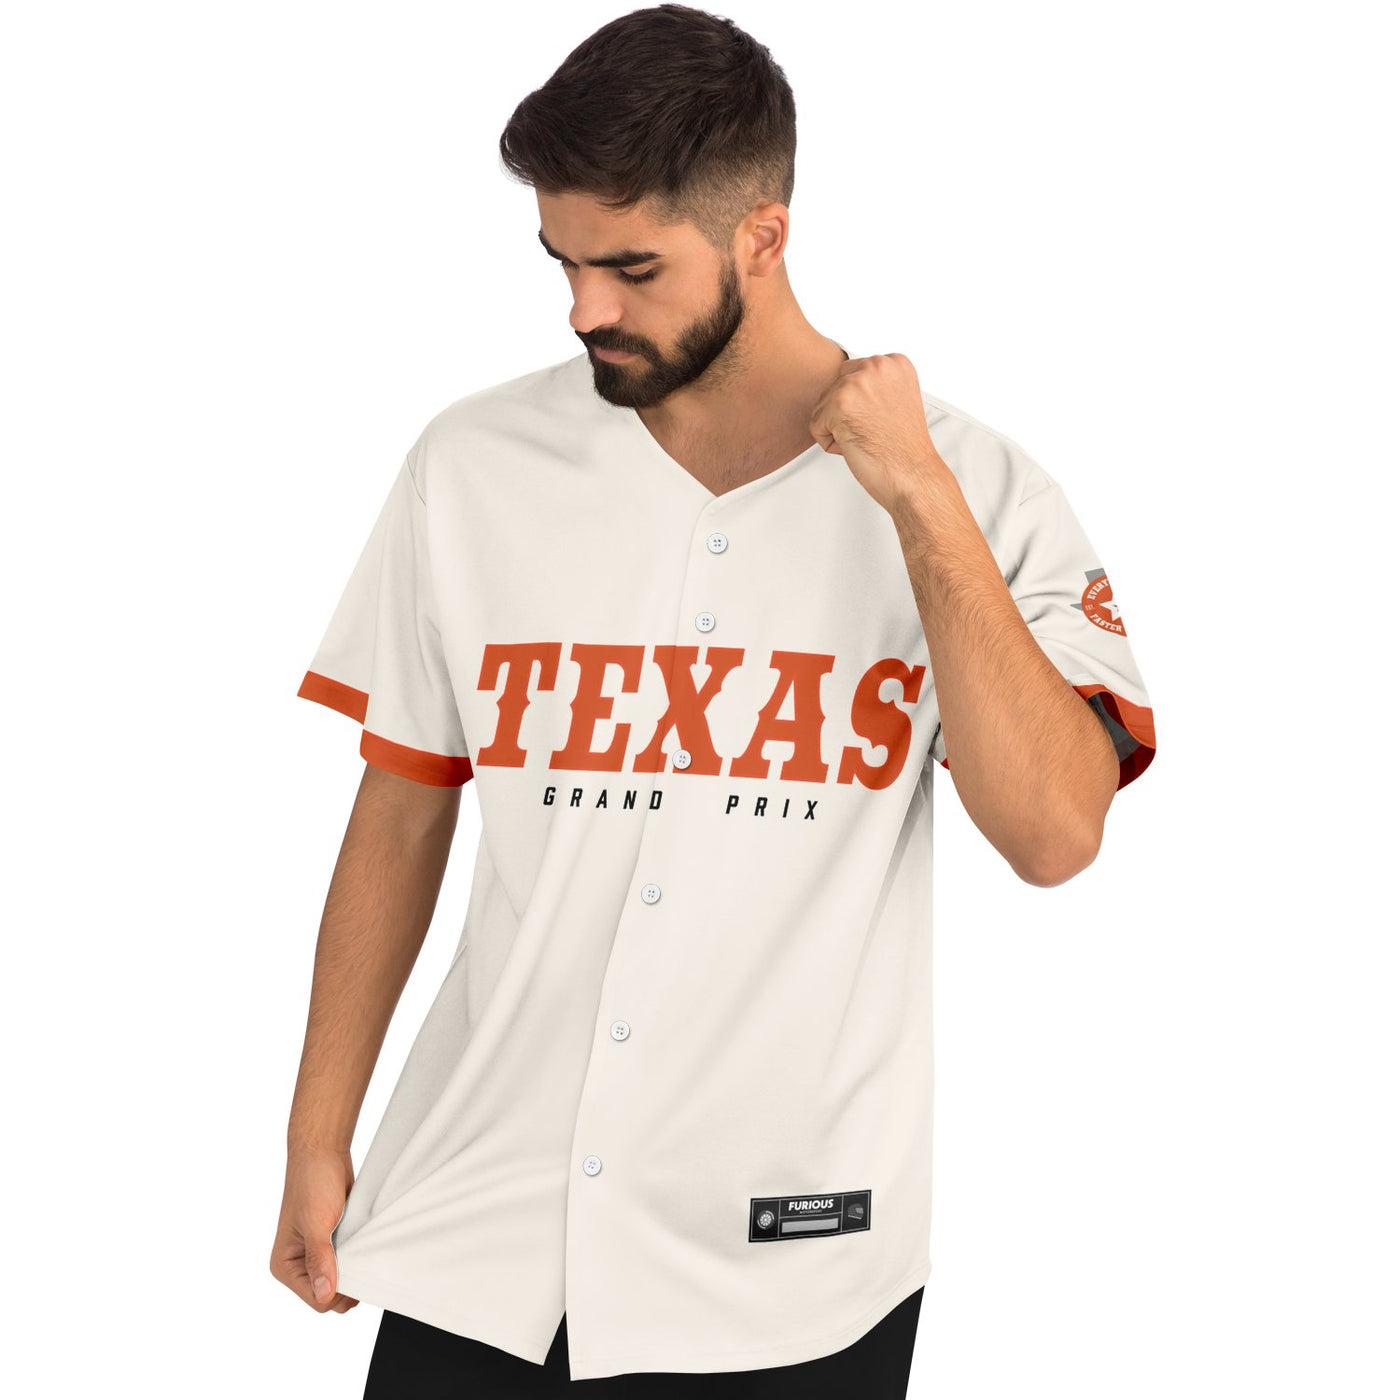 Russell - Off-White Texas GP Jersey - Furious Motorsport